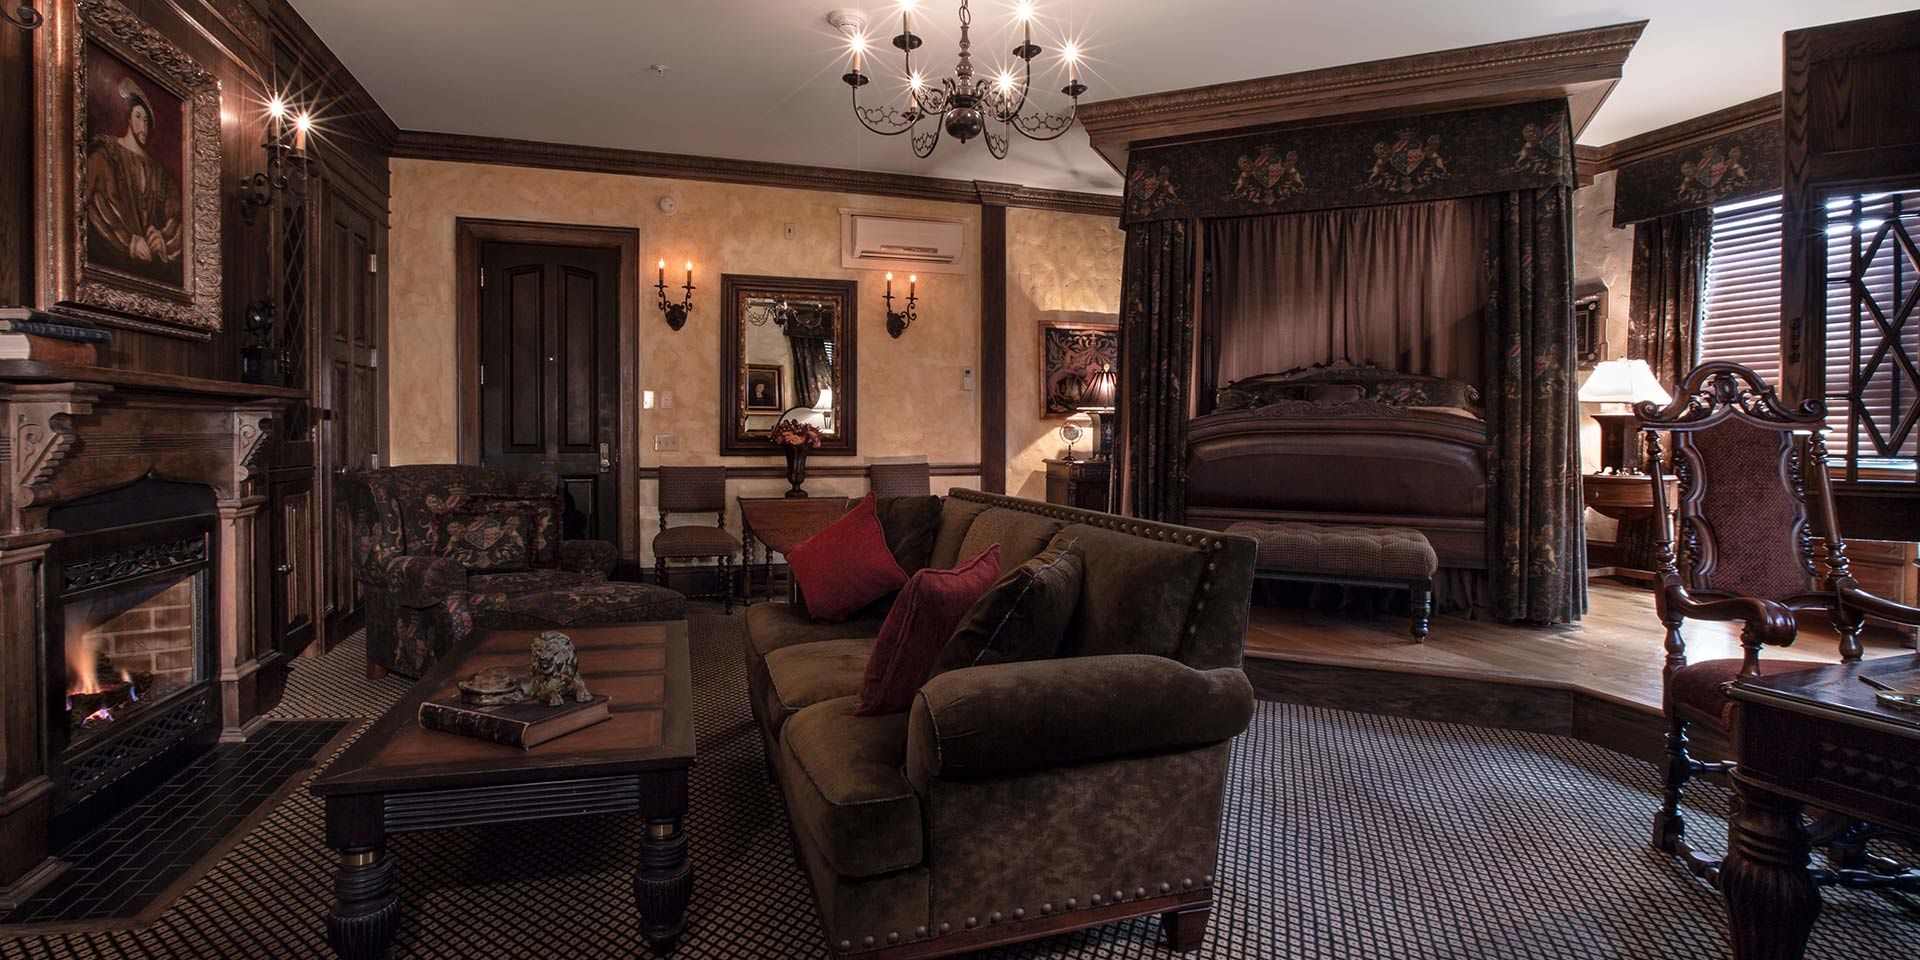 The English Tudor Guest Room boasts strikingly beautiful carved woodwork with traditional linen-fold oak panels and handcrafted stucco walls. Experience Medieval grandeur in the living area while you sit among a suede couch or overstuffed chair facing the